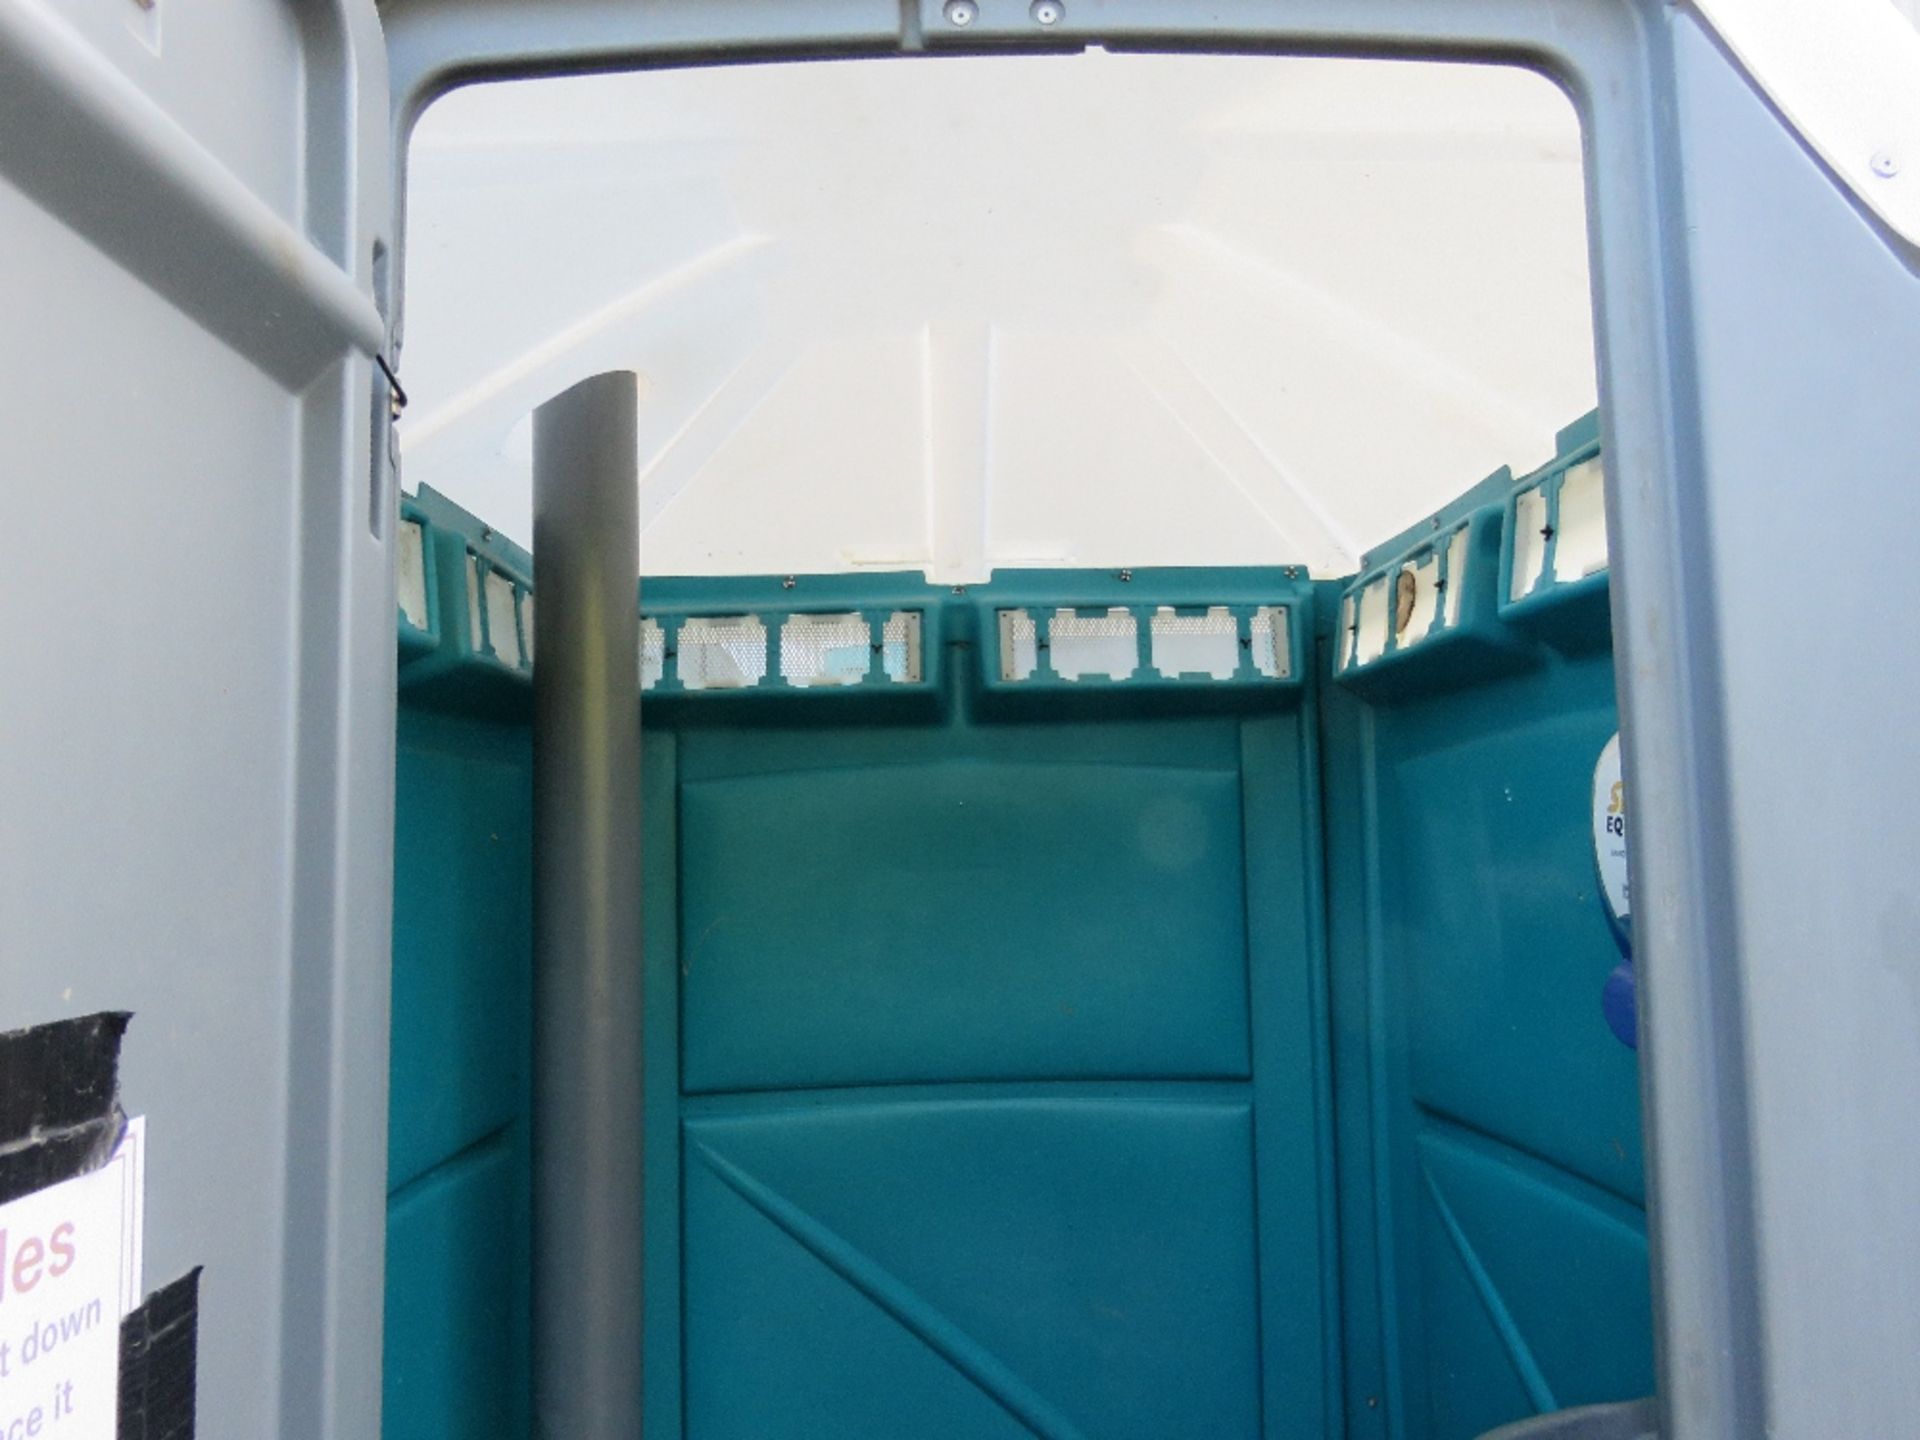 PORTABLE SITE TOILET WITH WASHBASIN AND URINAL. CLEANED AND BLUE DETERGENT ADDED READY FOR USE. T - Image 4 of 4